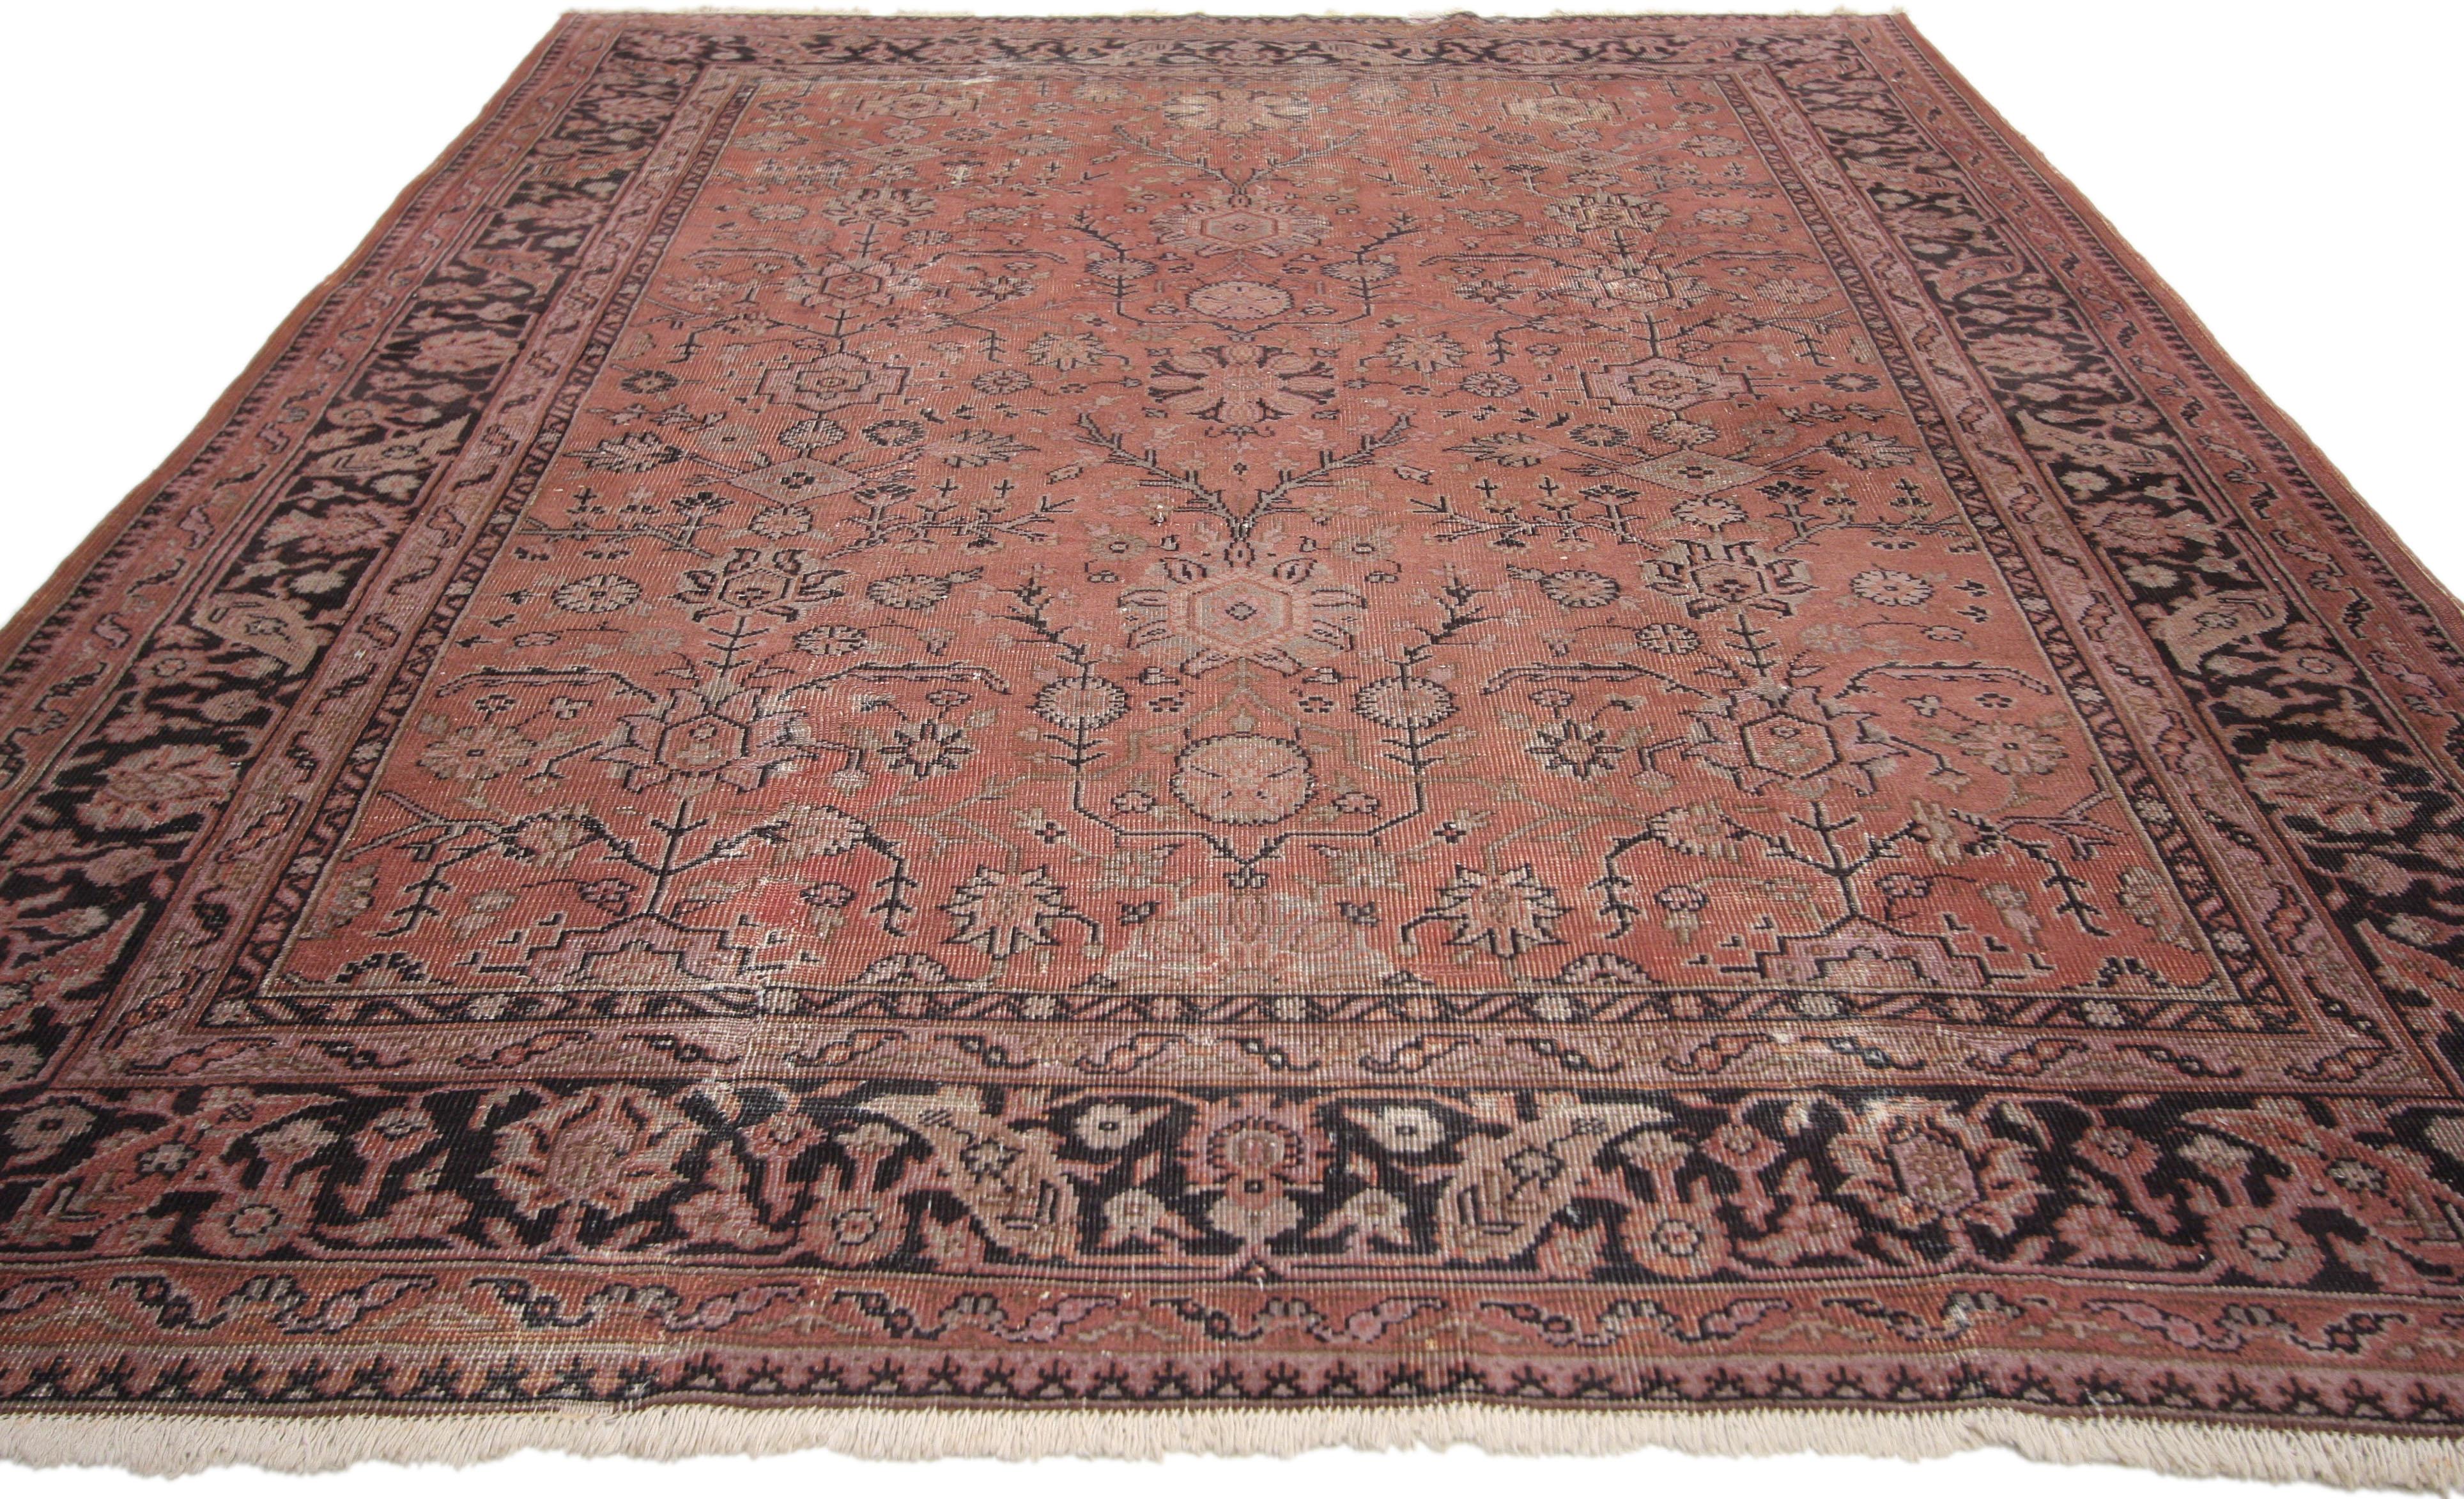 71513, distressed vintage Turkish rug with Romantic Swedish farmhouse style. Full of character and charm, this hand knotted wool distressed vintage Turkish rug with features an all-over geometric floral pattern composed of blooming splayed palmettes